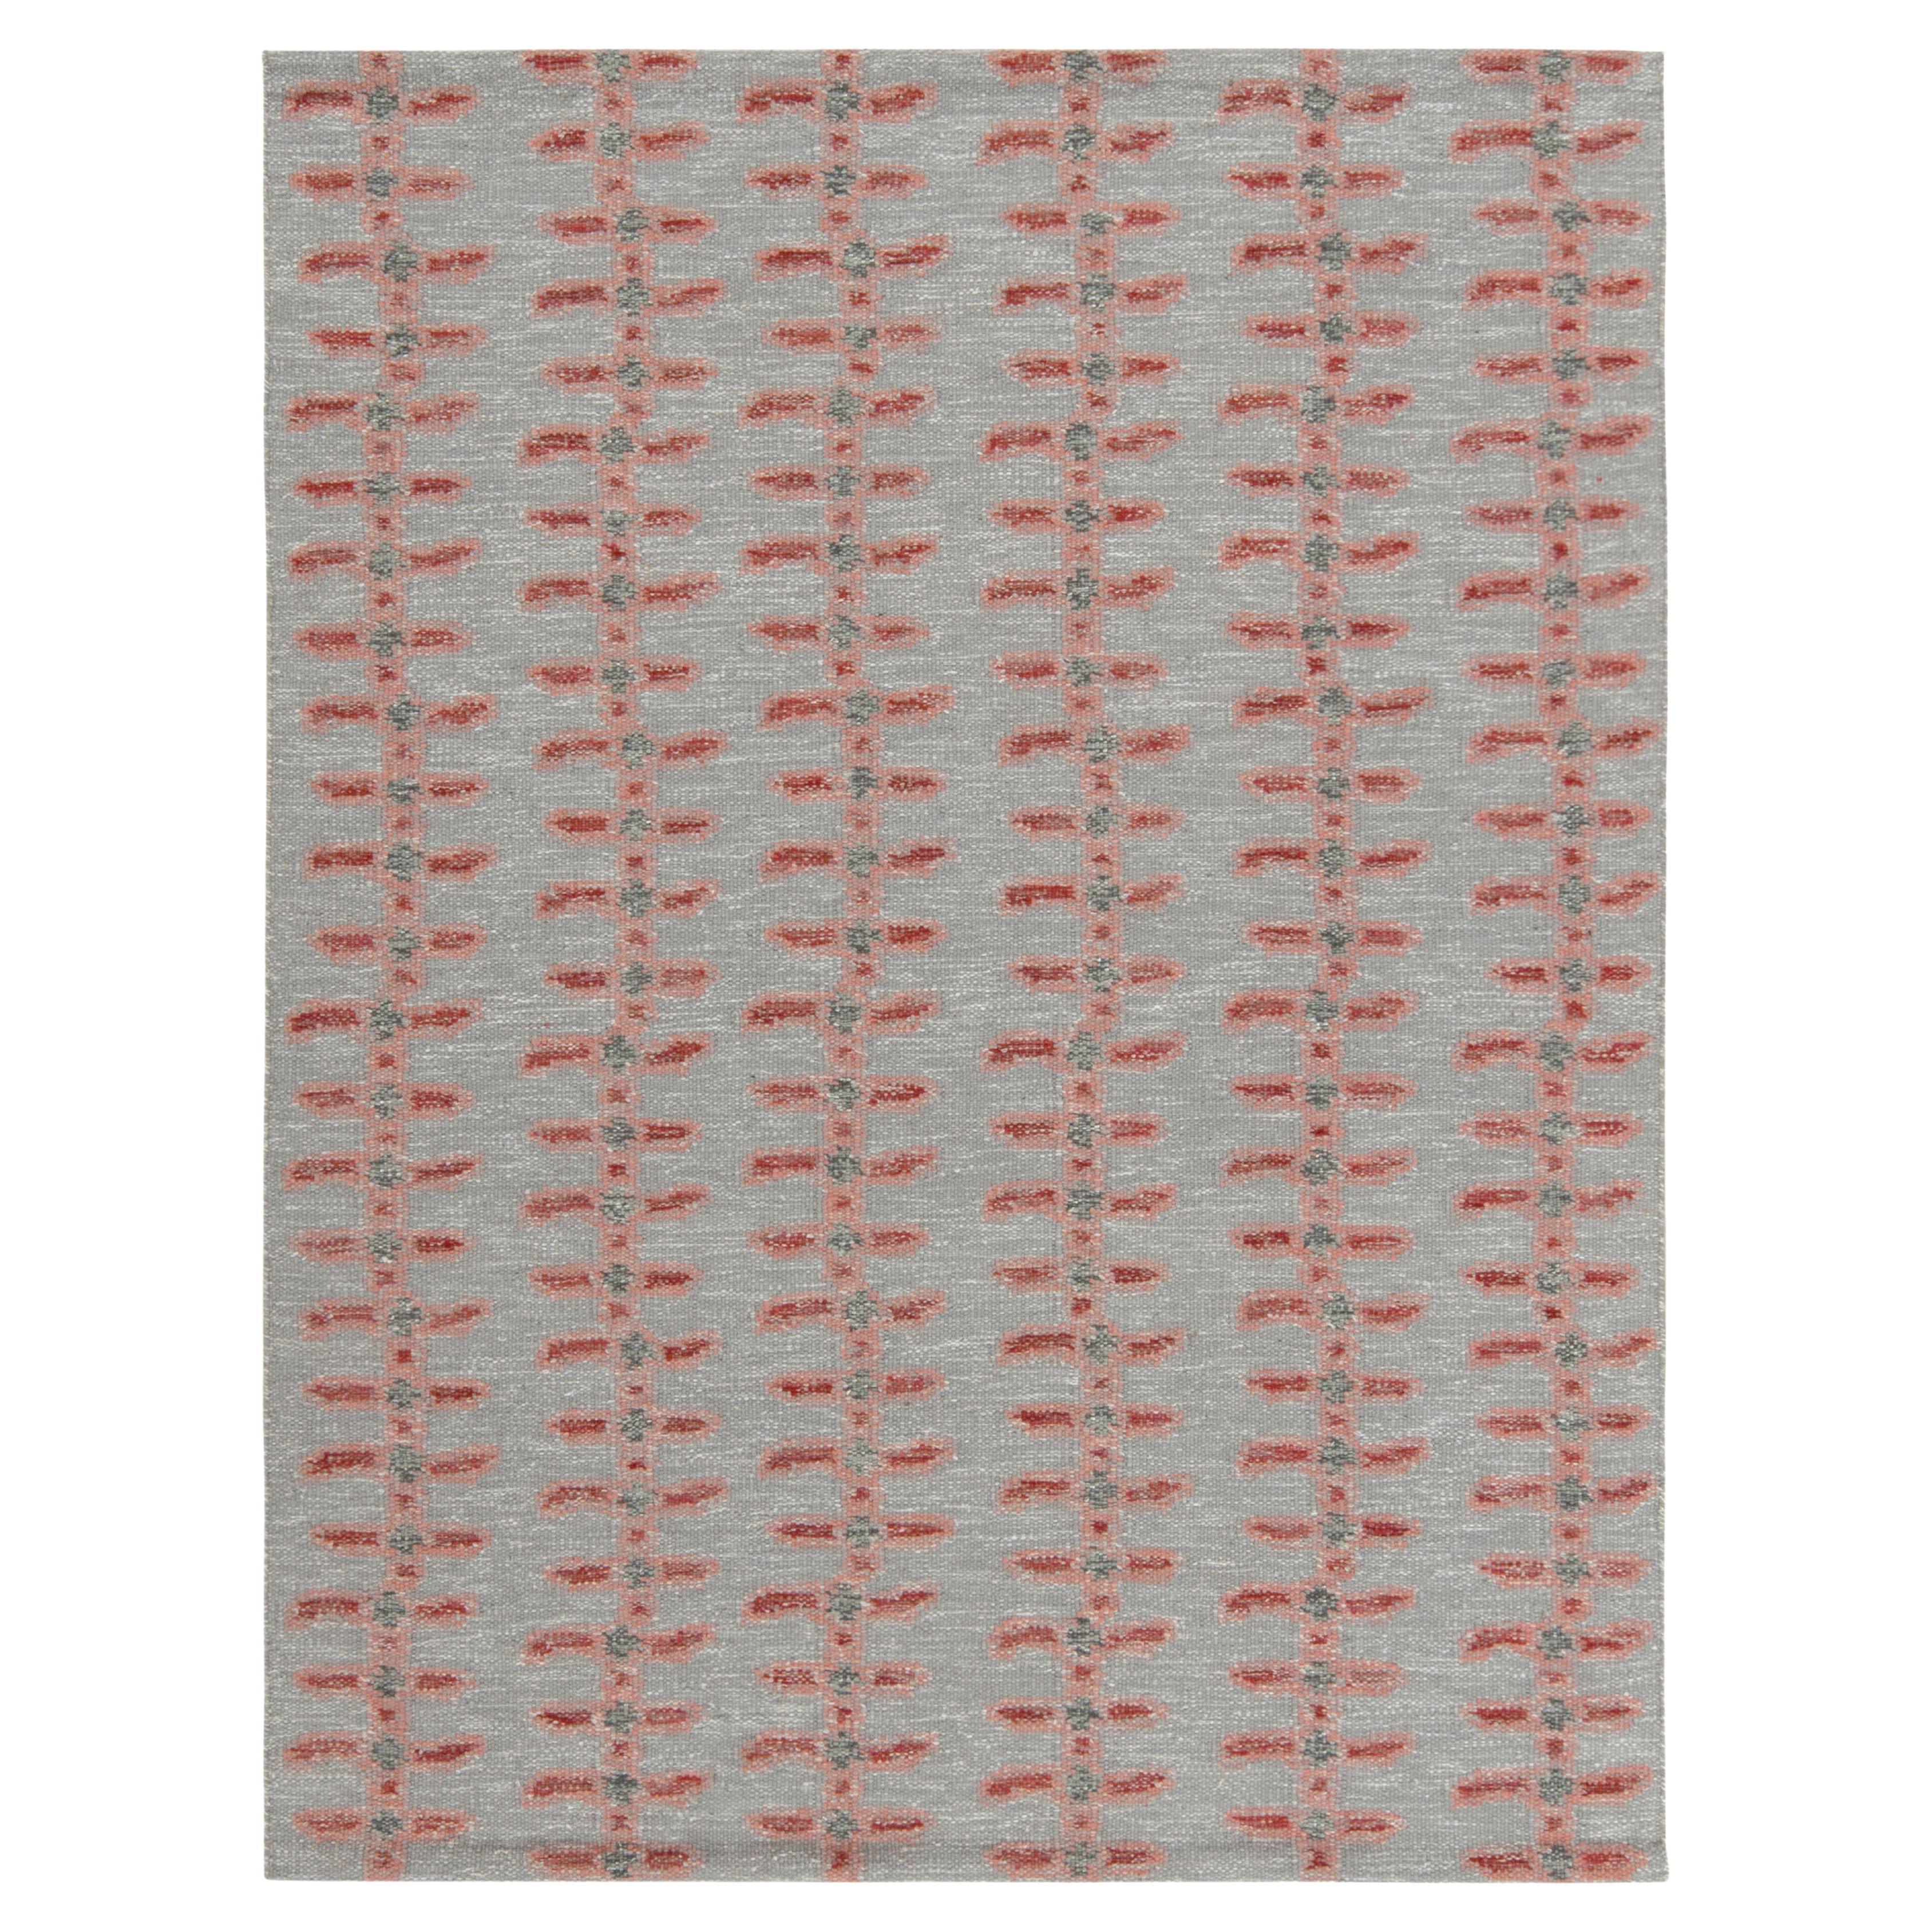 Rug & Kilim's Scandinavian Style Kilim Rug in Gray, Red & Pink For Sale